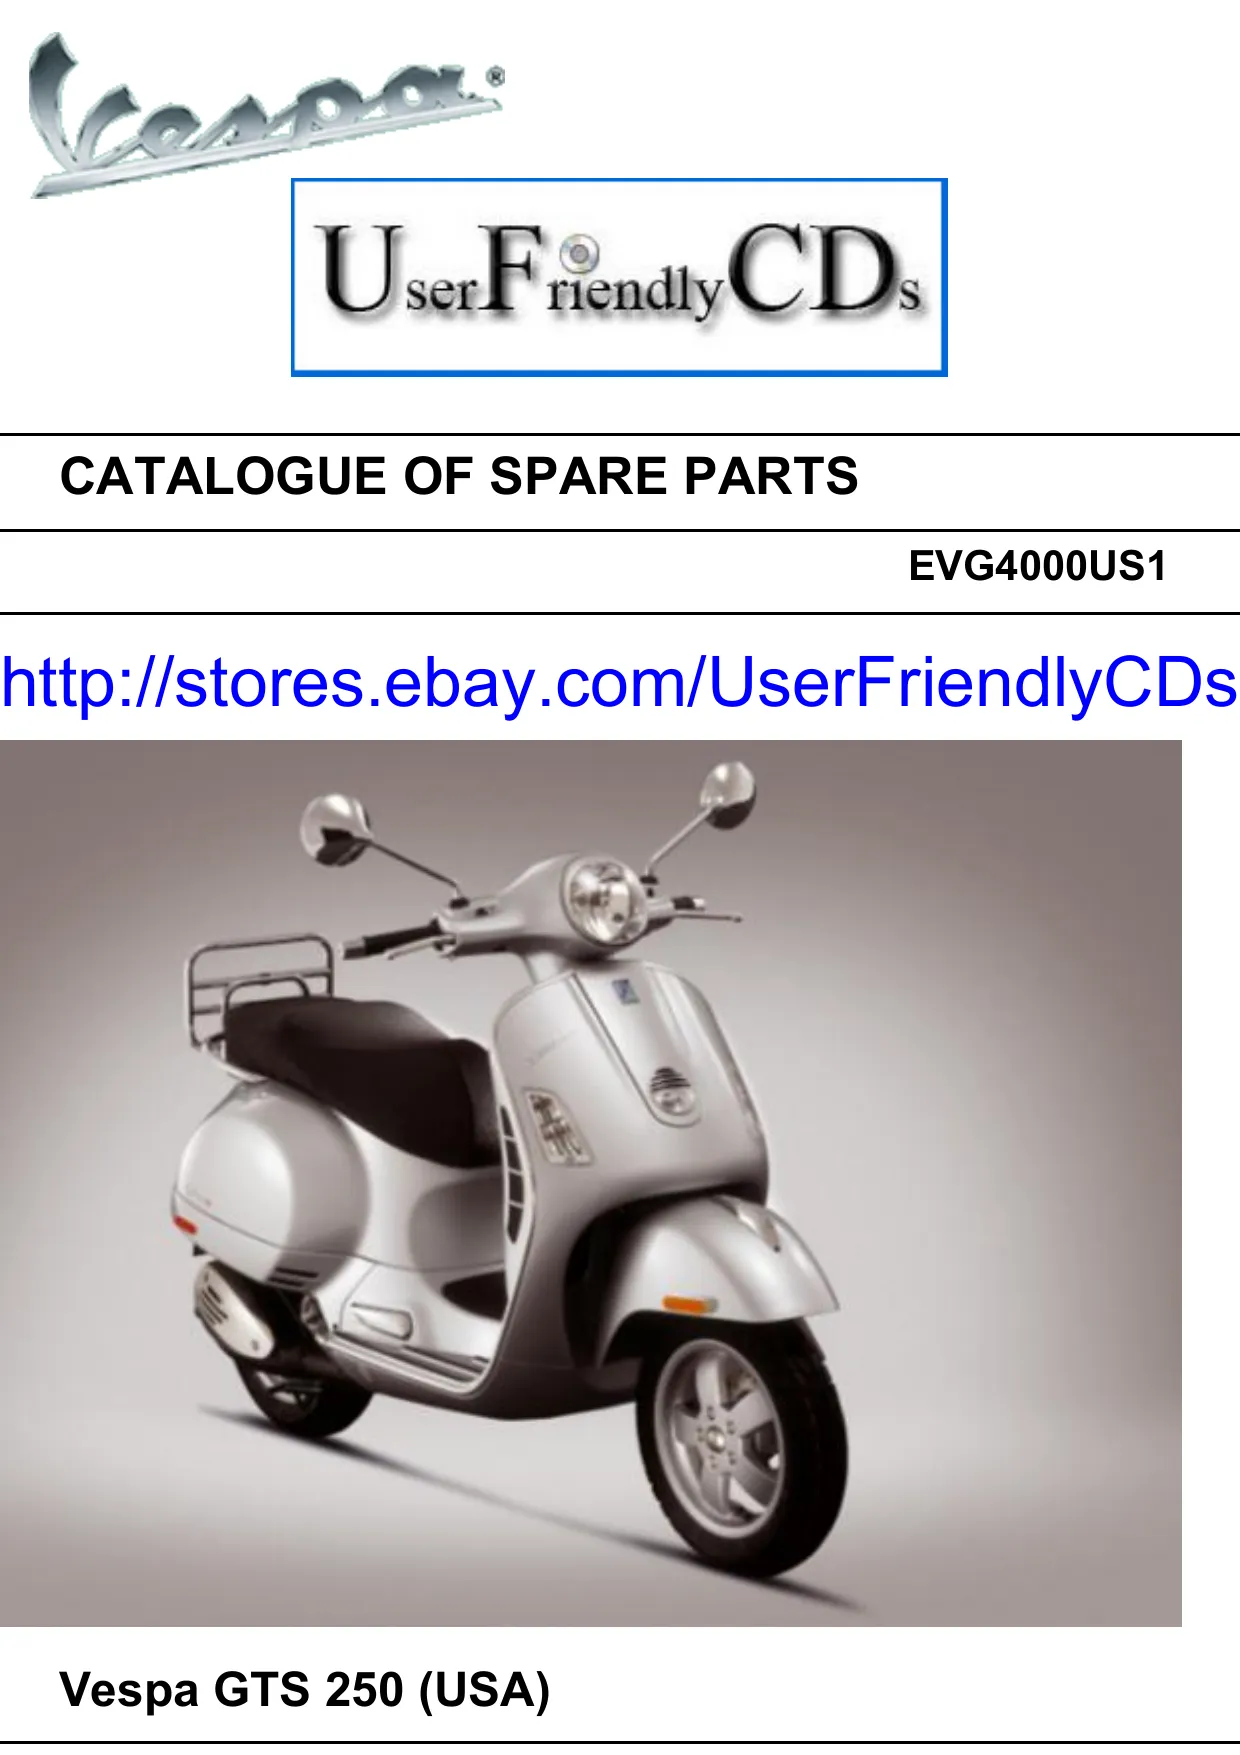 Vespa GTS 250 IE scooter parts catalog Preview image 1